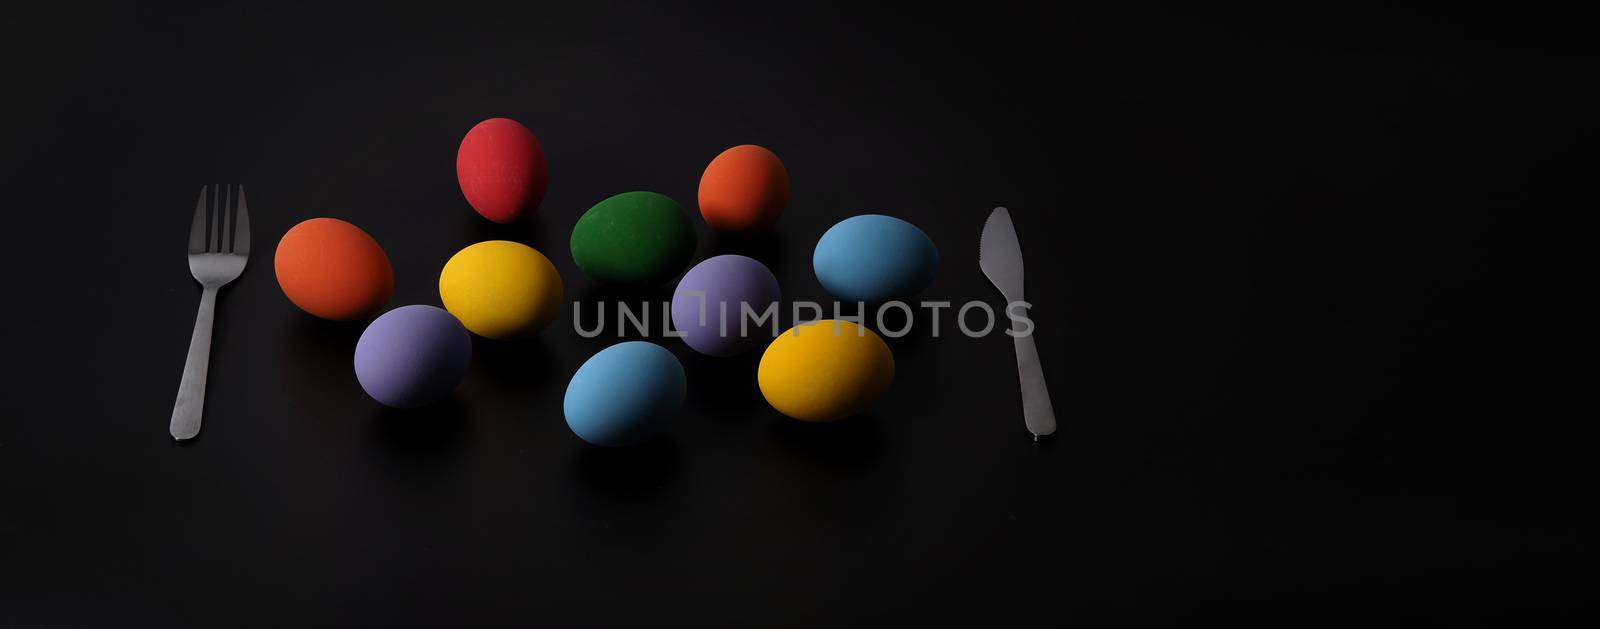 Multi-colorful of easter eggs on background in studio with close by gnepphoto